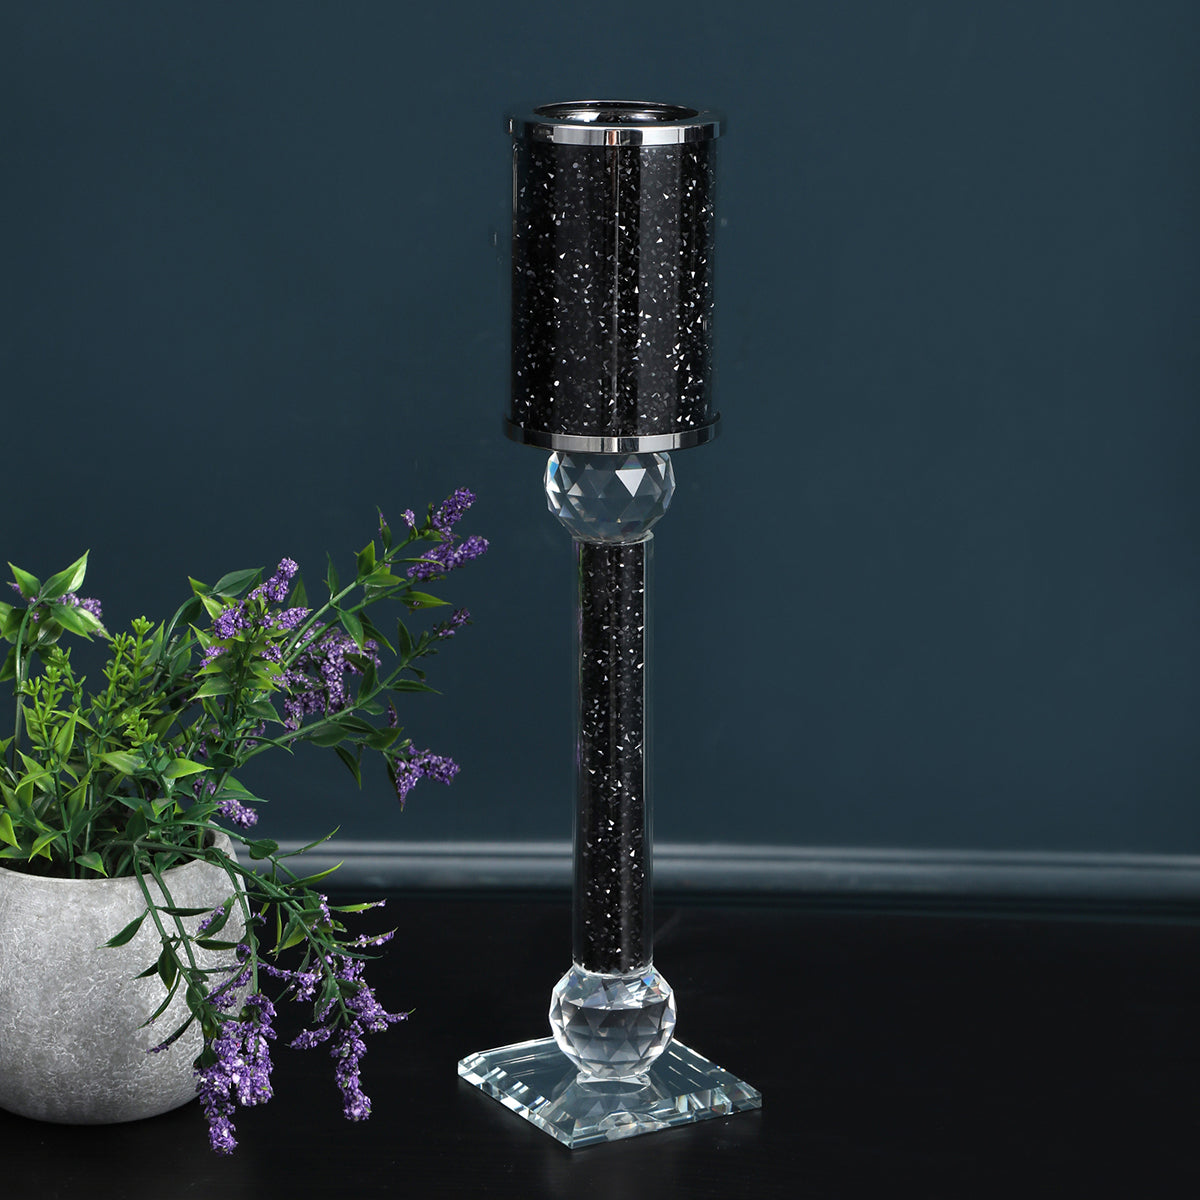 Ambrose Exquisite Small Candle Holder 2.75" L X 2.75" black-glass